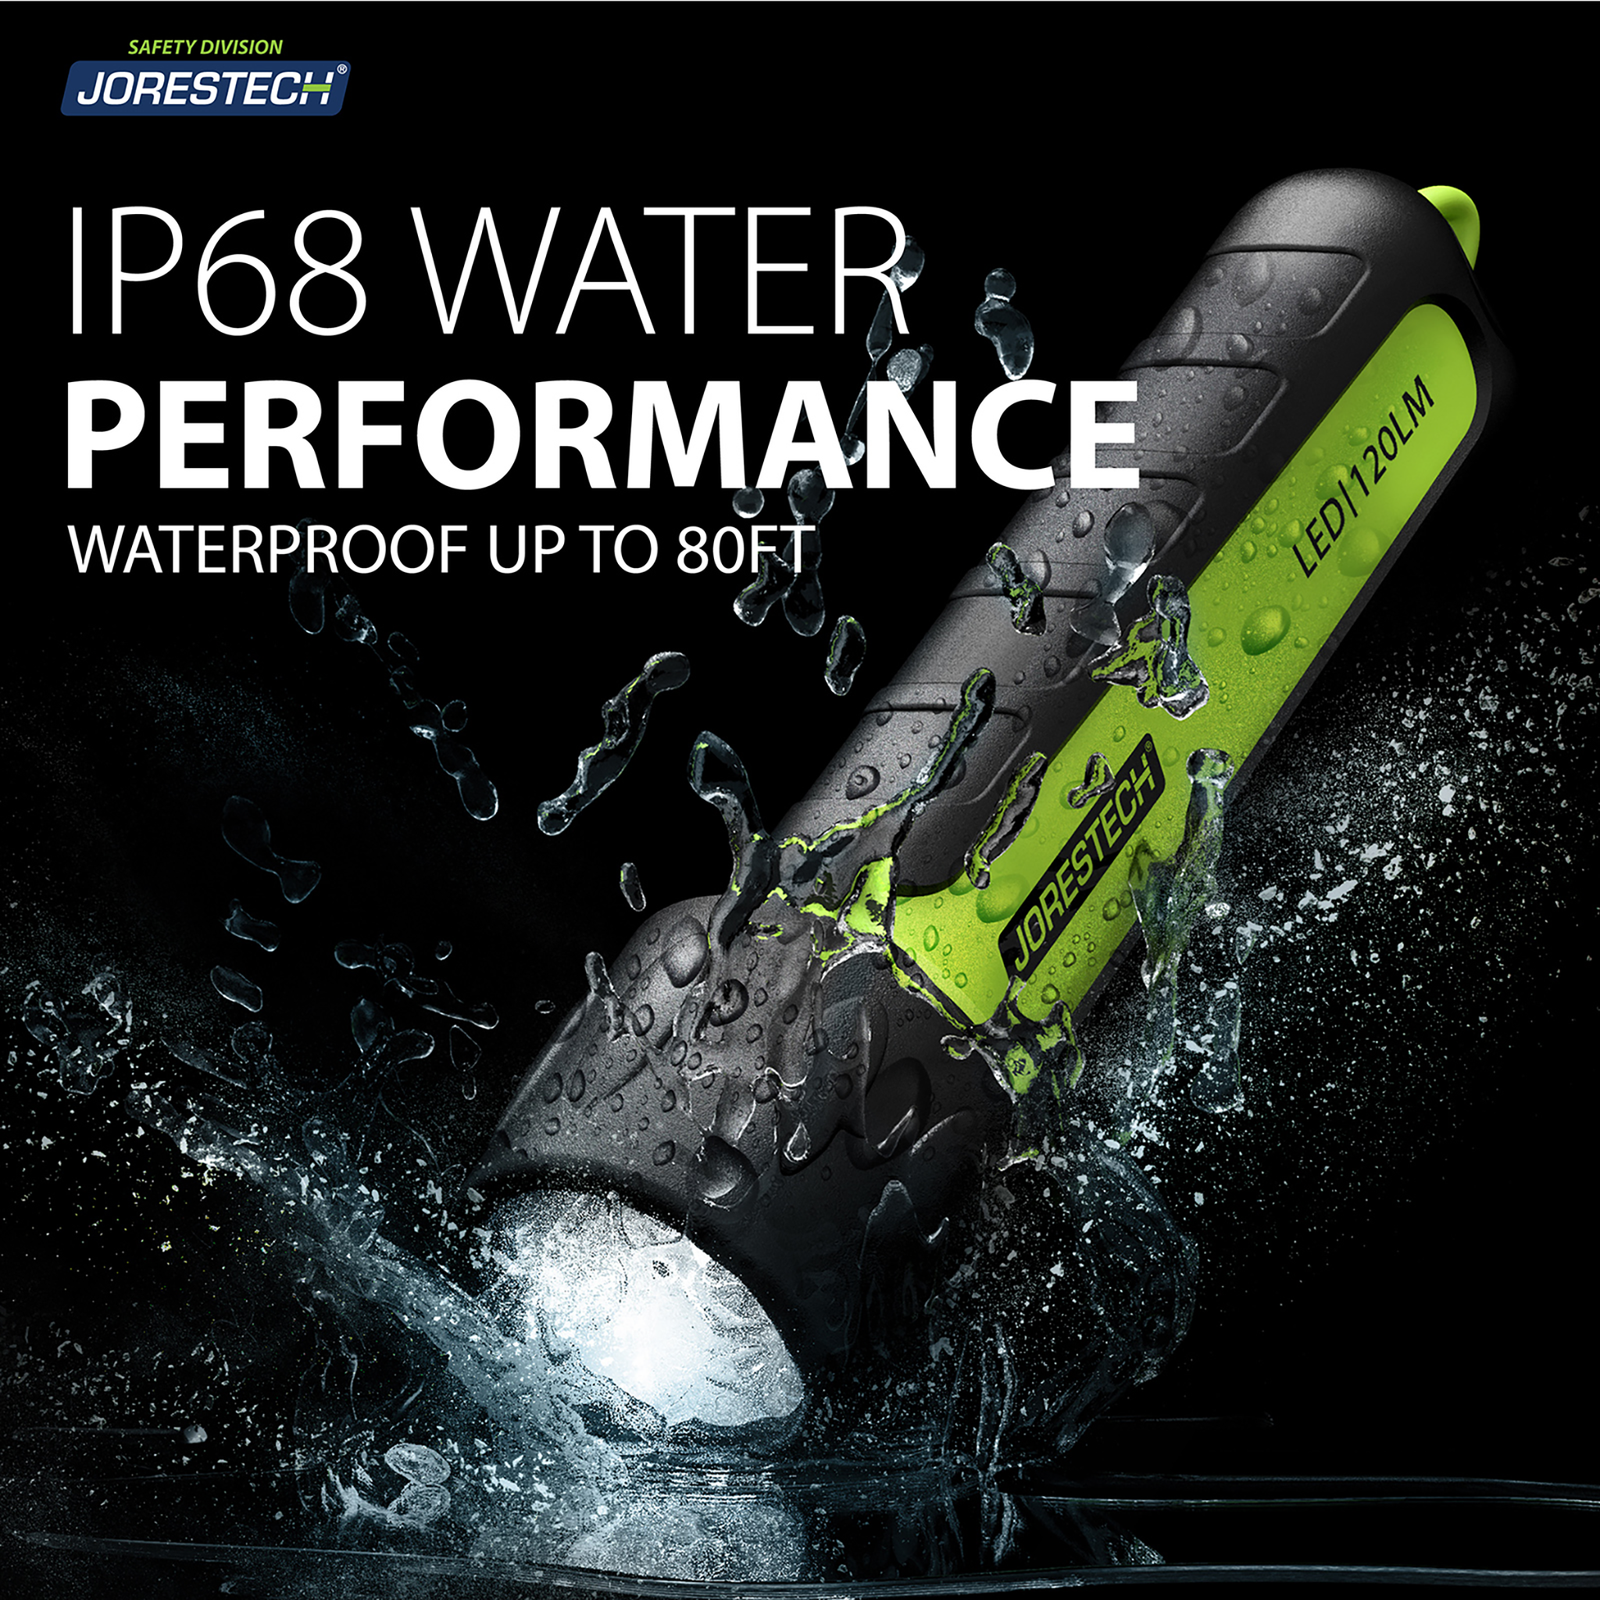 A led flashlight in black background were the only light sorce is coming from the flash light which is hitting the ground while creating a big water splash. Text reads: IP68 water performance waterproof up to 80FT.